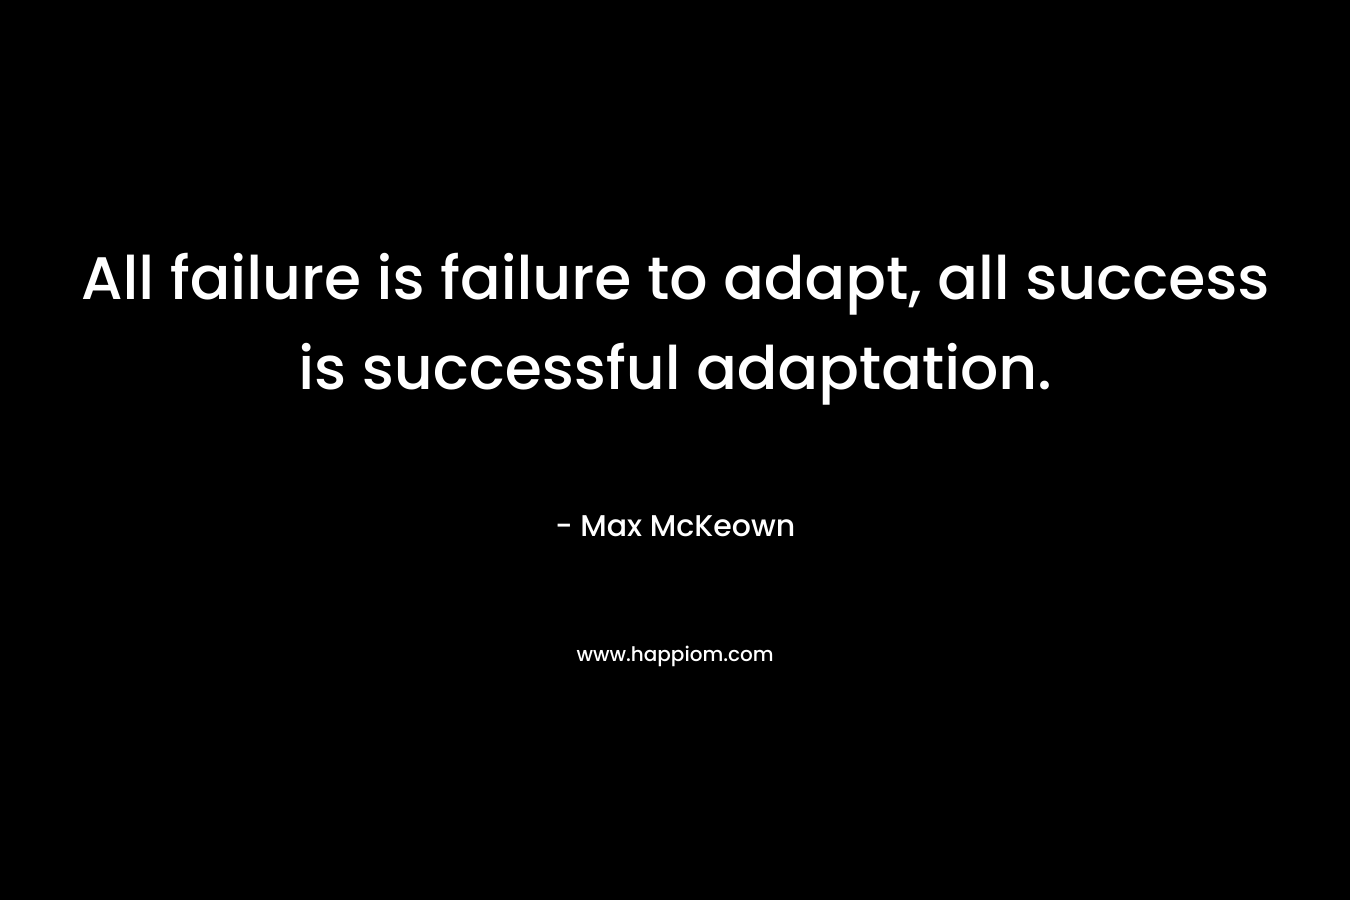 All failure is failure to adapt, all success is successful adaptation. – Max McKeown